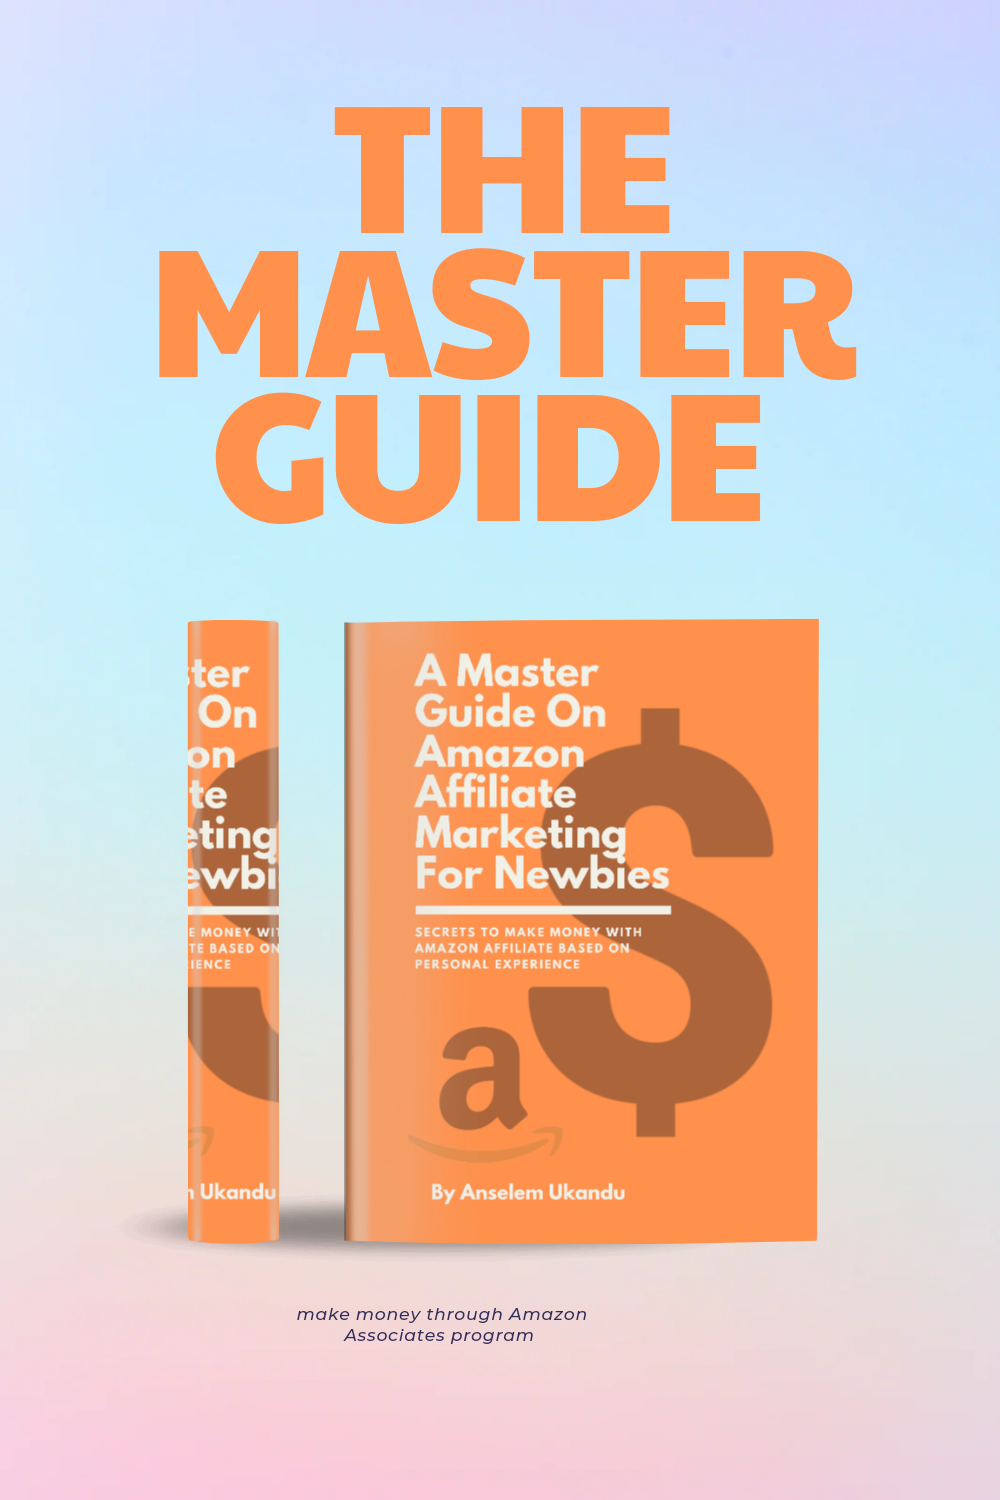 A Master Guide On Amazon Affiliate Marketing For Newbies